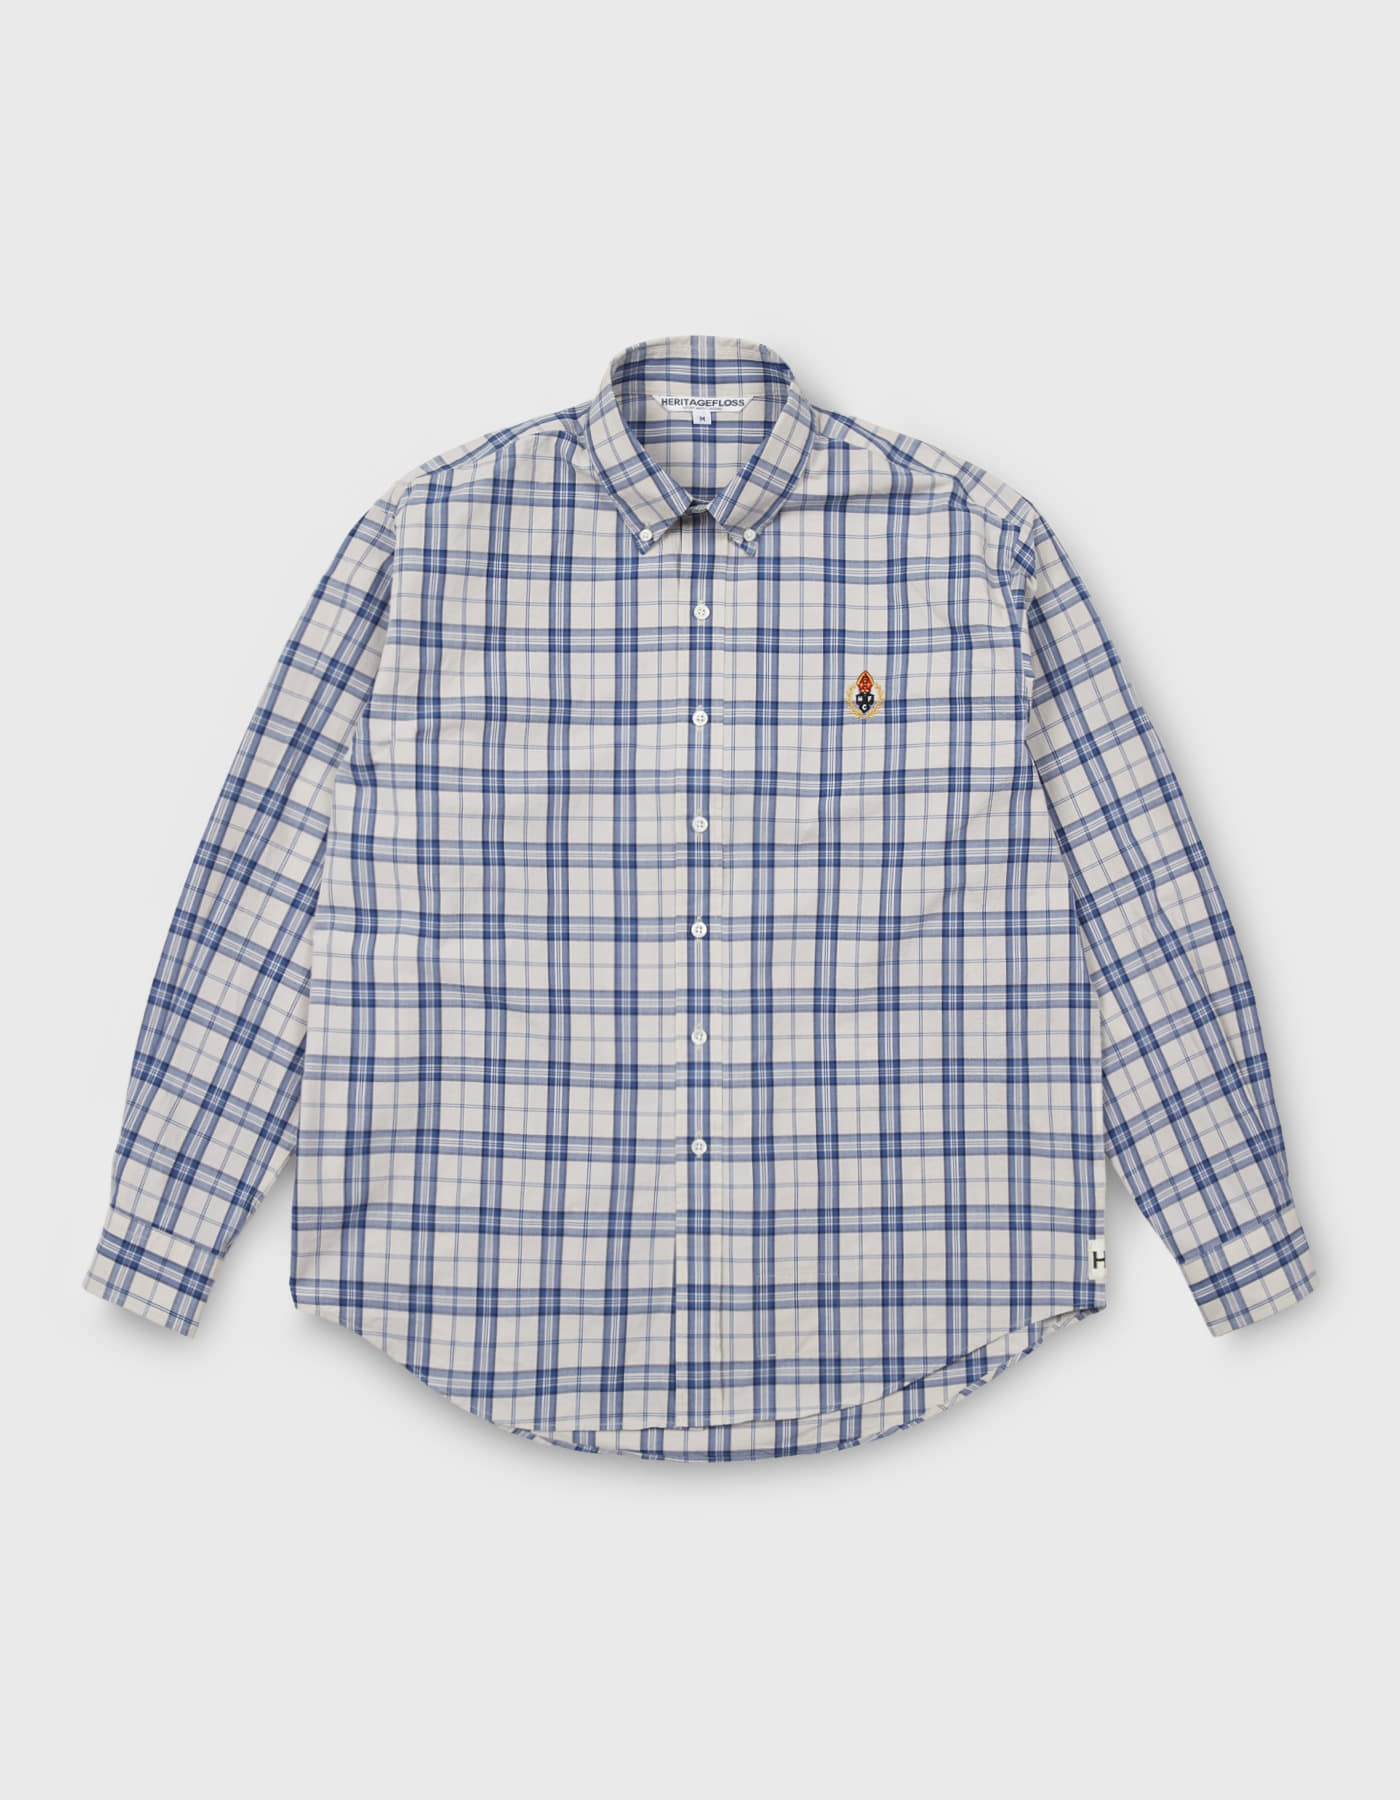 HFC CREST CHECKED SHIRT / Blue-Ivory